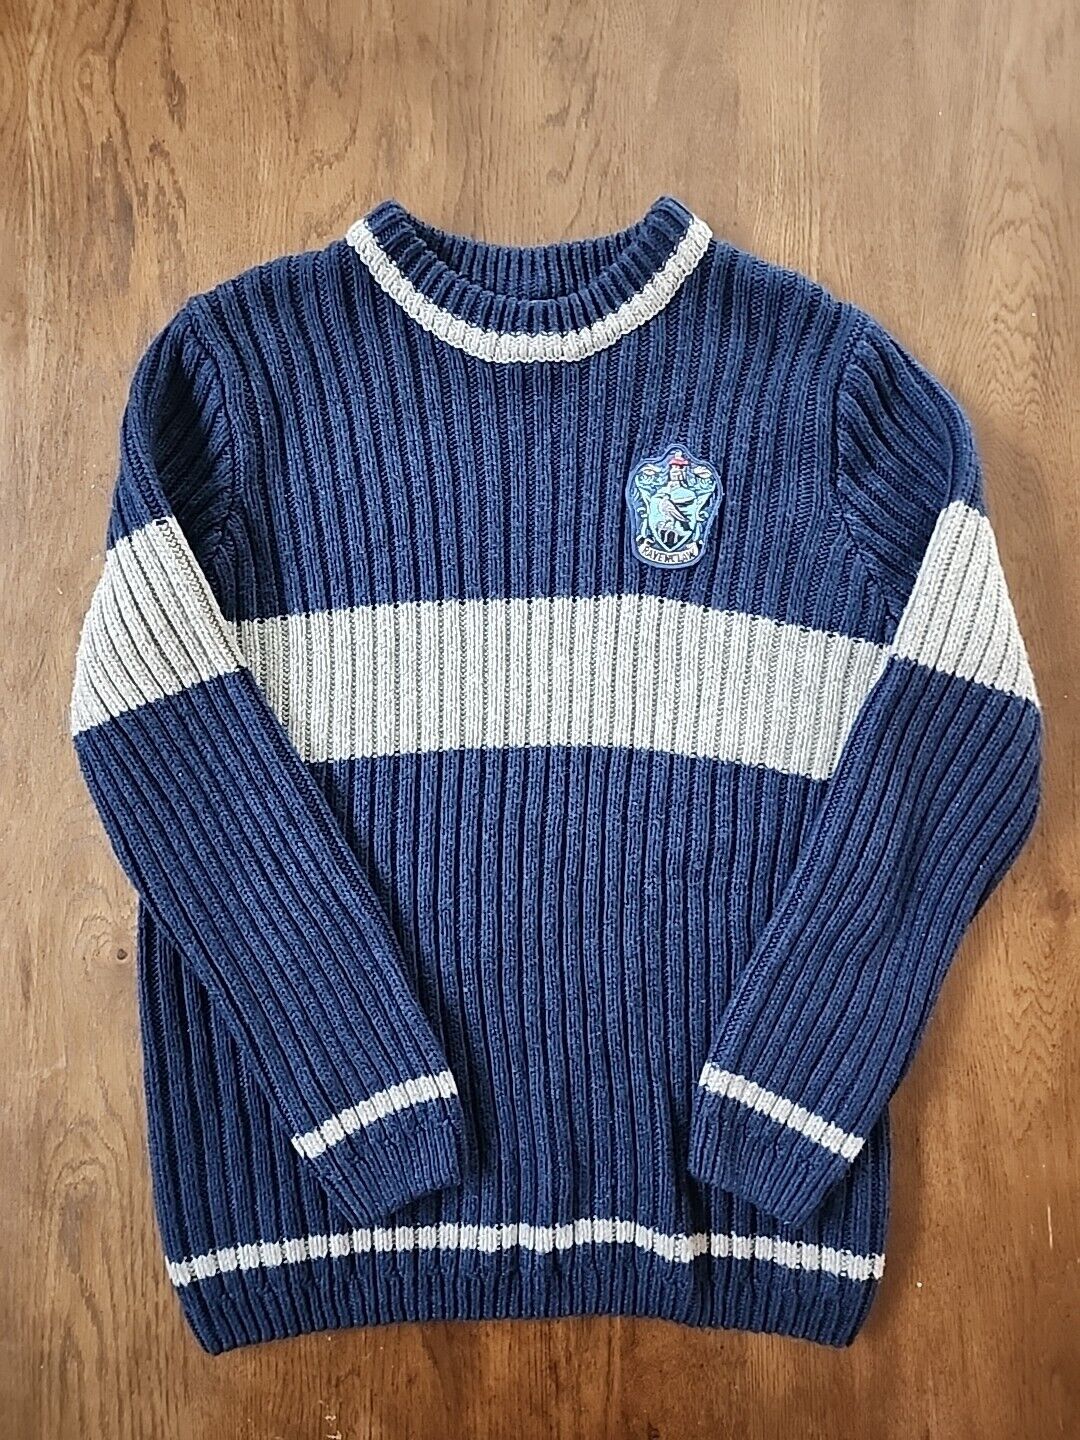 Harry Potter Ravenclaw Quidditch Knit Sweater Adult Size Large